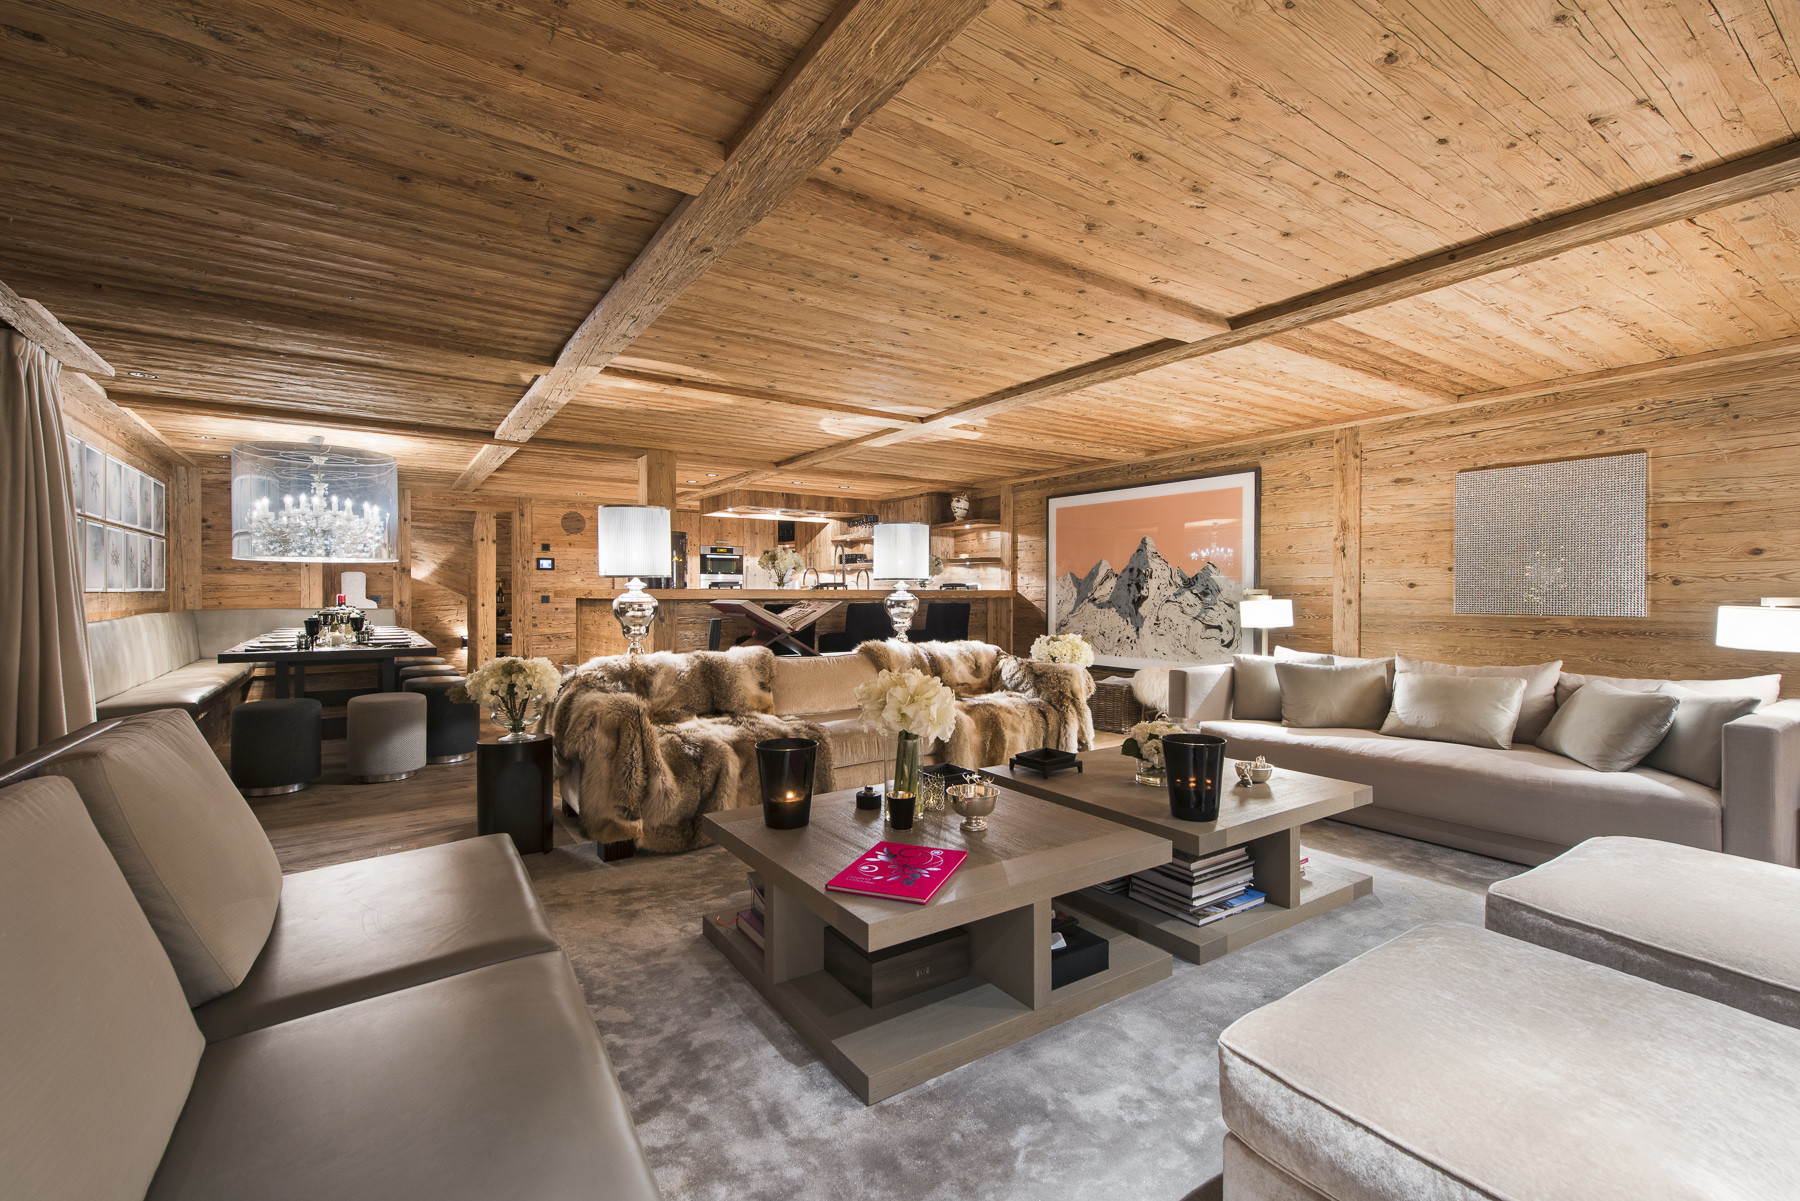 Kings-avenue-gstaad-hammam-swimming-pool-covered-parking-boot-heaters-fireplace-sound-system-area-gstaad-003-2